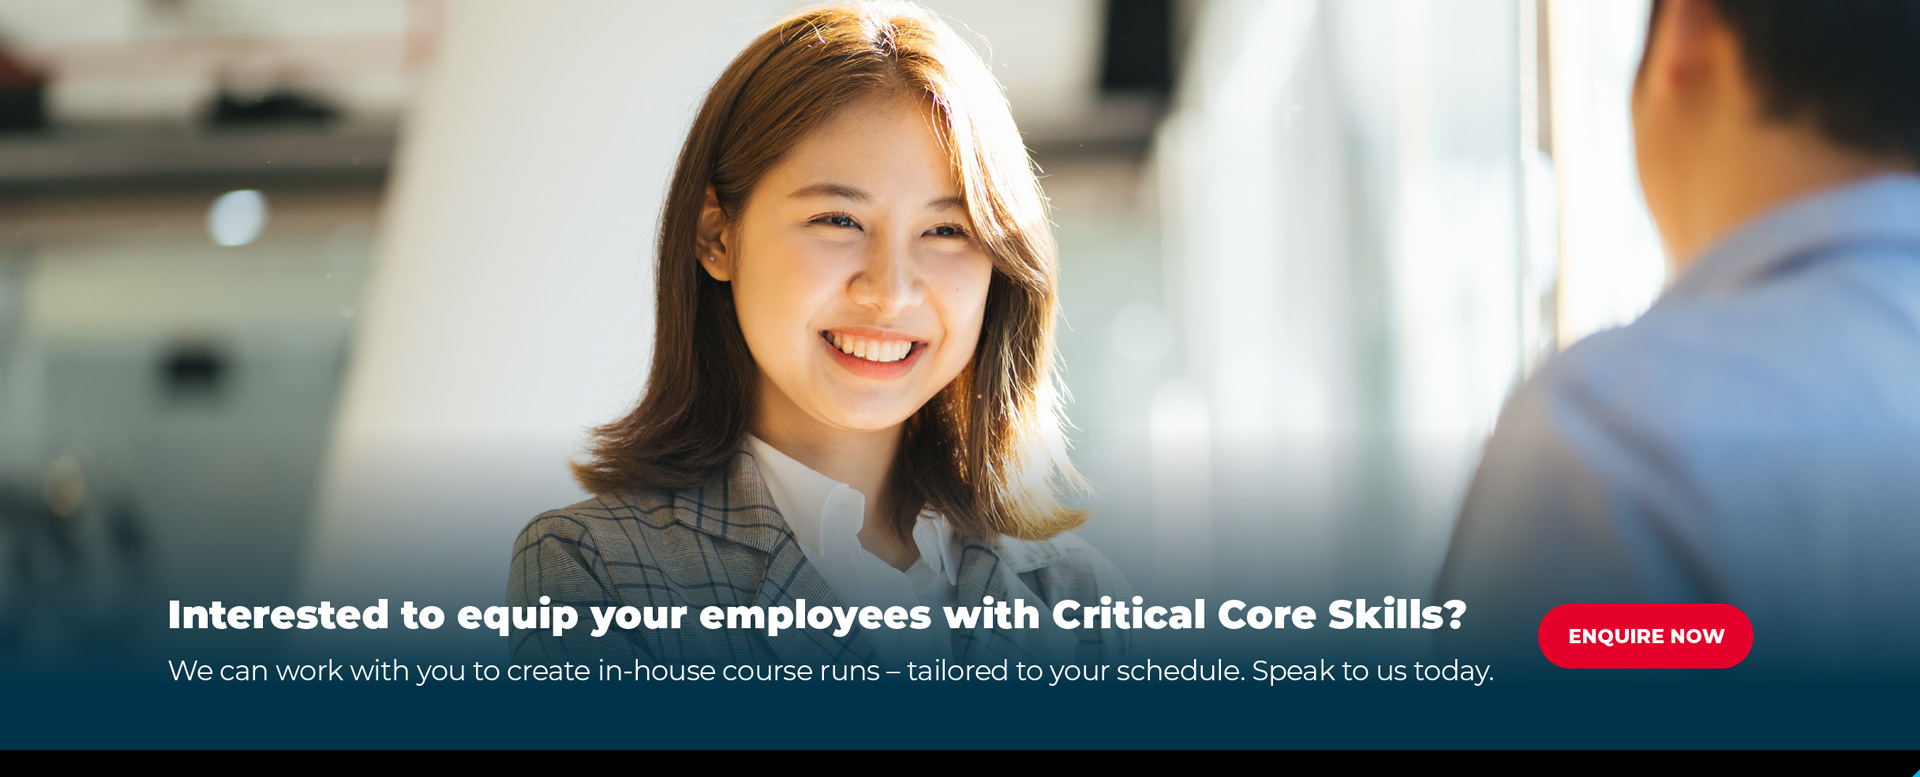 Interested to equip your employees with critical core skills?